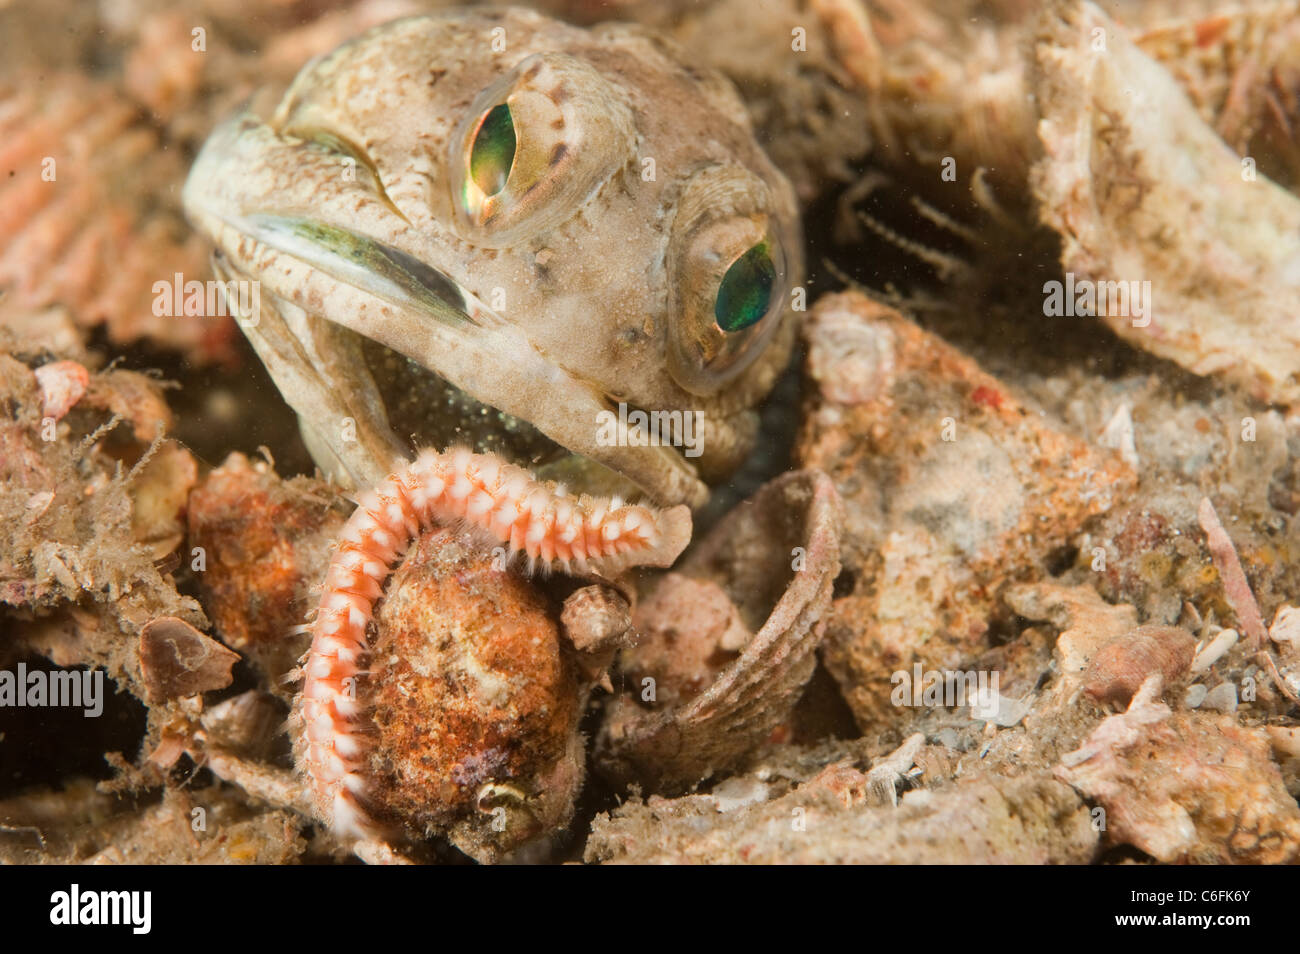 Male Banded Jawfish Opistognathus macrognathus removes a Bristle Worm from his burrow in the Lake Worth Lagoon, Singer Island FL Stock Photo